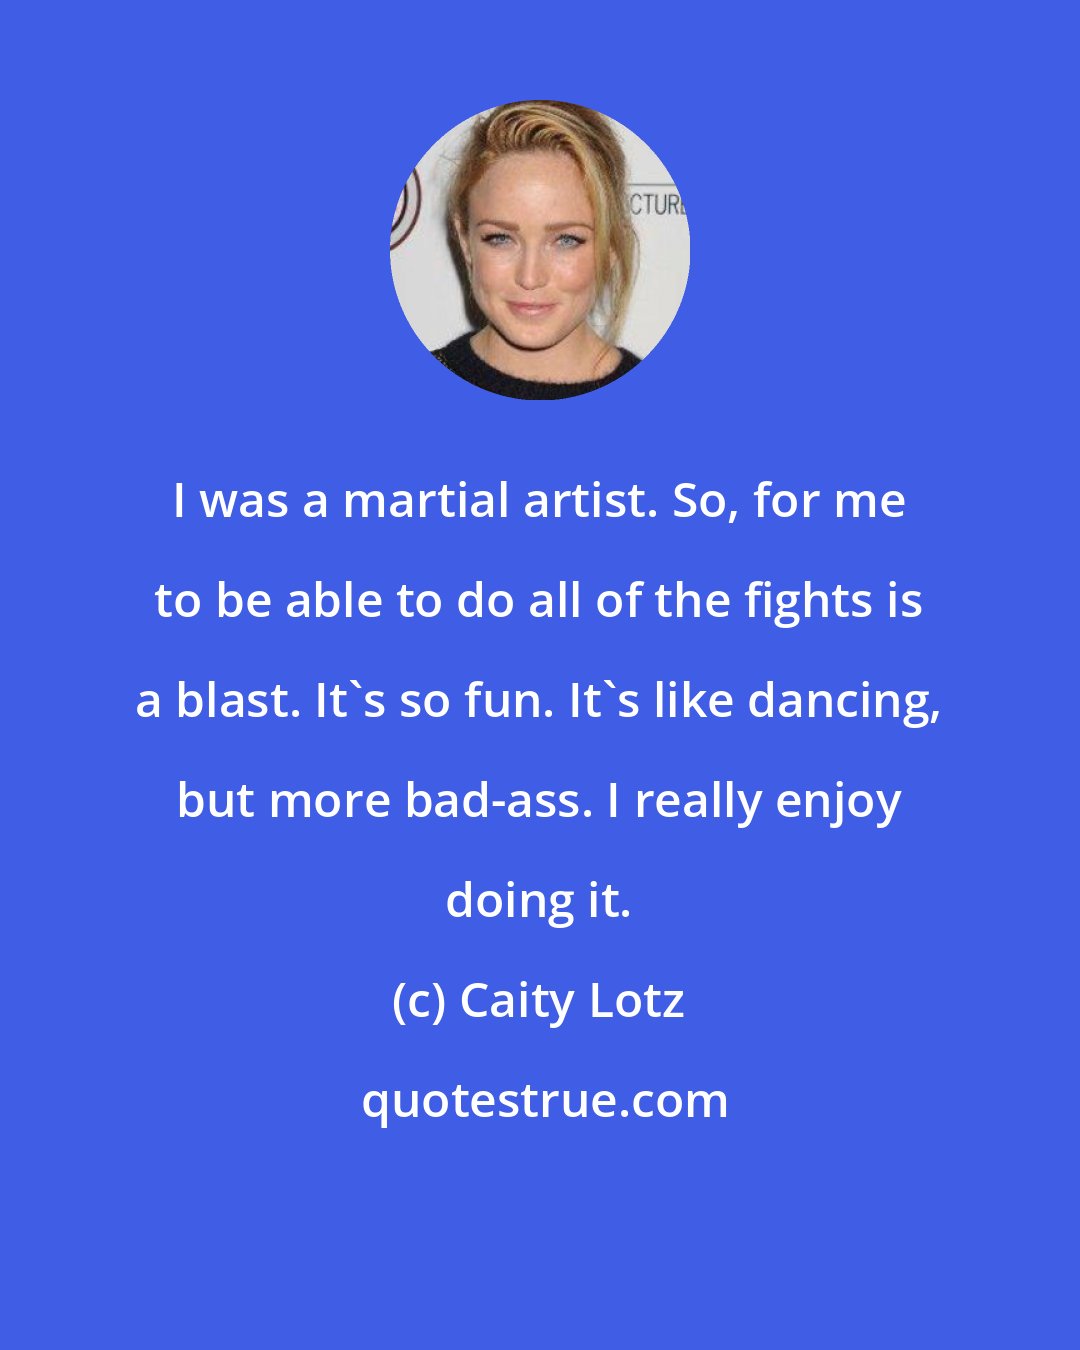 Caity Lotz: I was a martial artist. So, for me to be able to do all of the fights is a blast. It's so fun. It's like dancing, but more bad-ass. I really enjoy doing it.